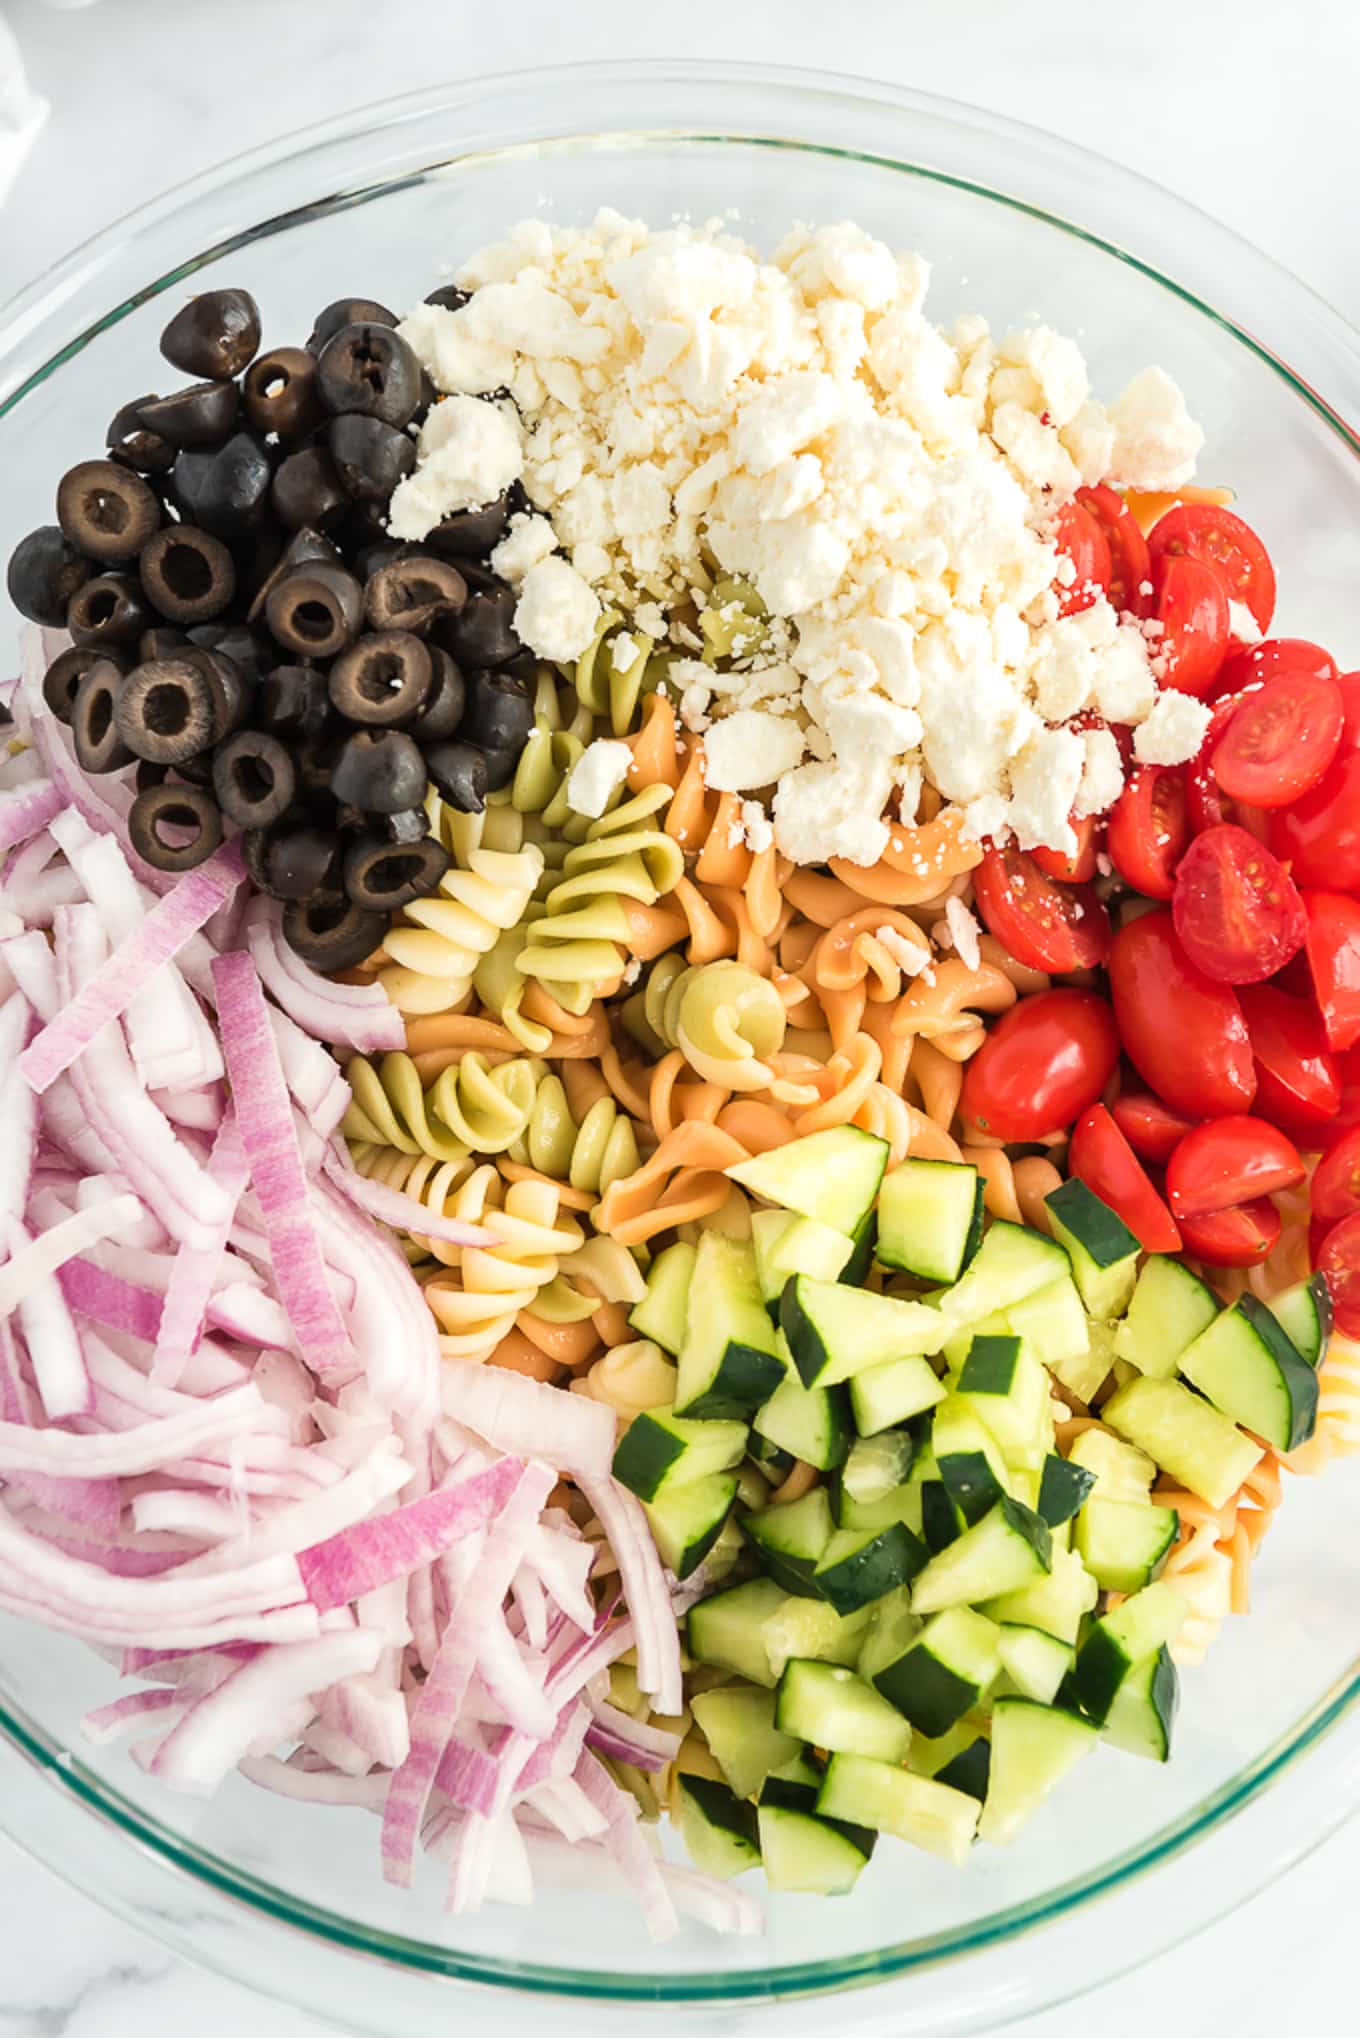 A bowl of pasta topped with chopped vegetables to make a Greek salad with pasta.